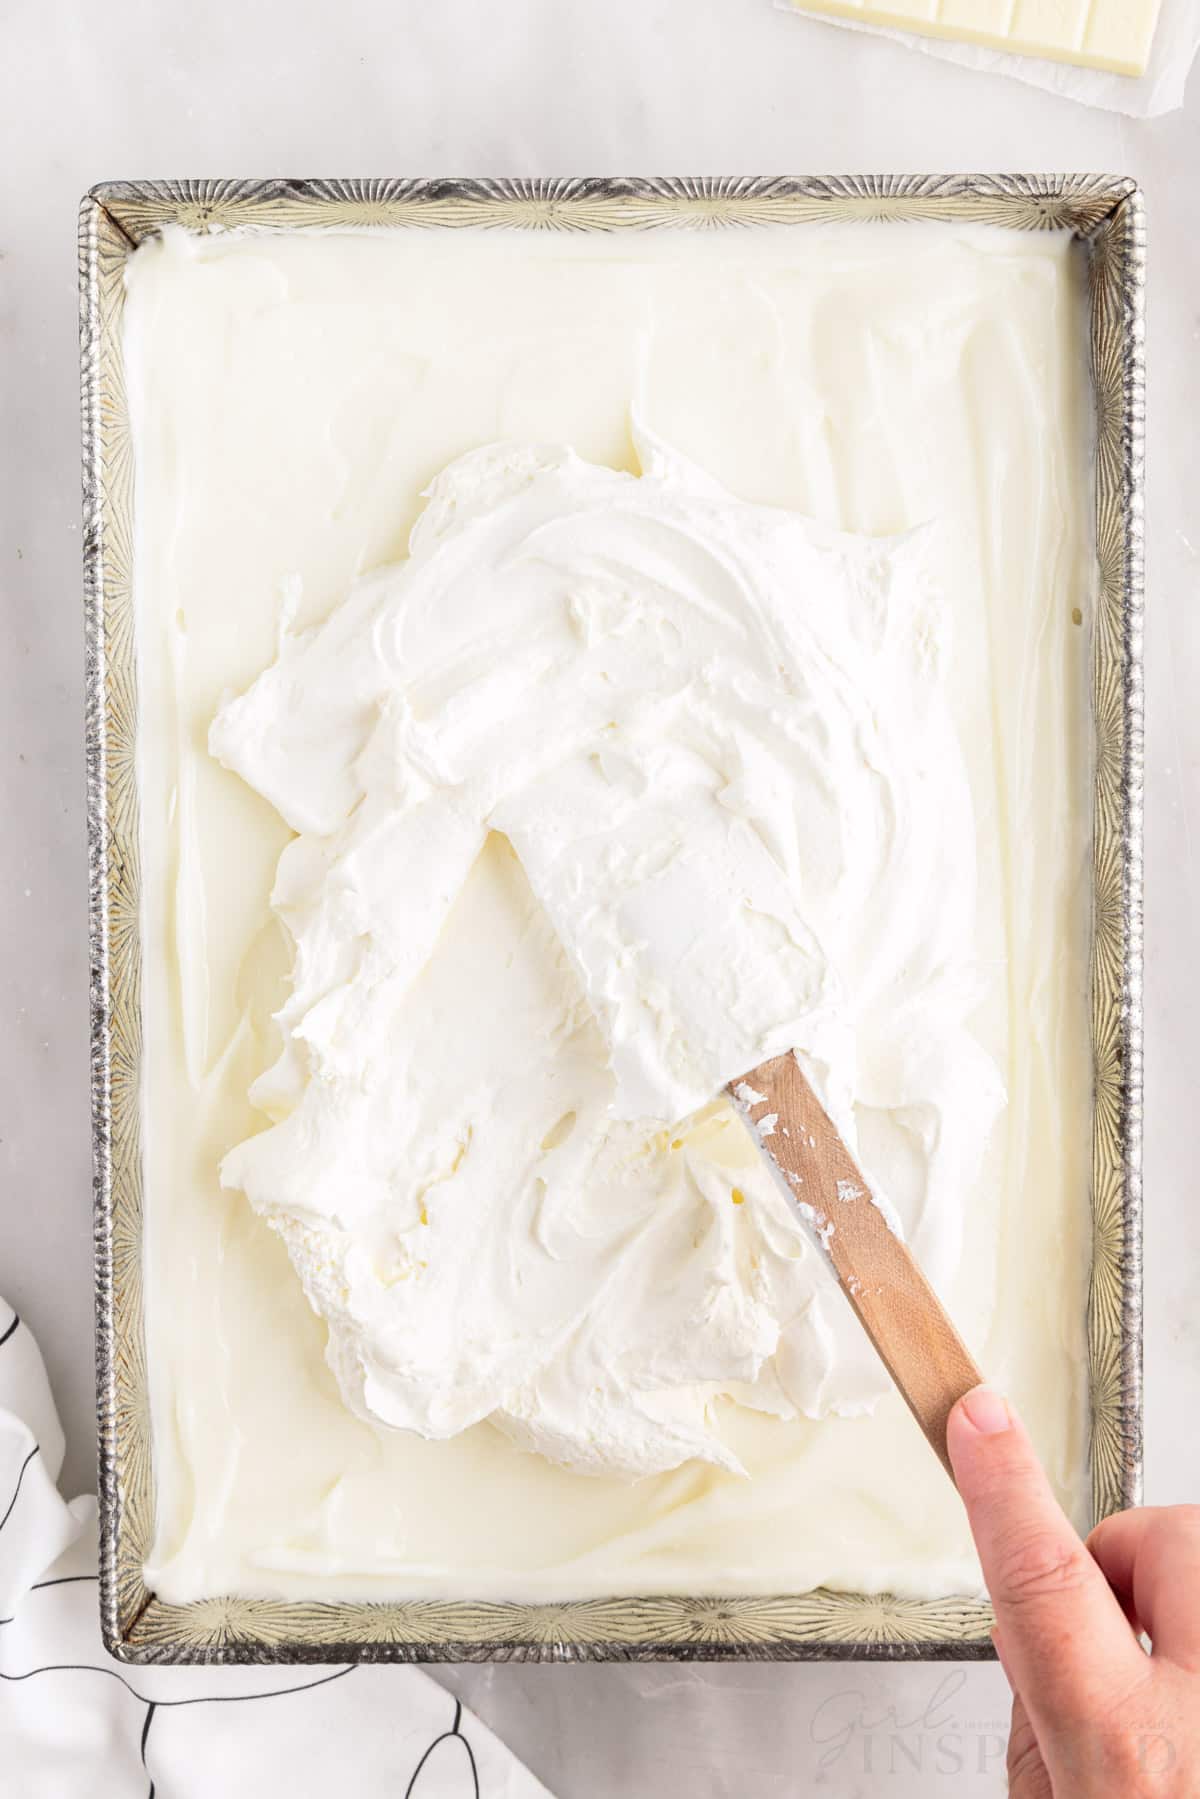 adding the remaining cool whip with a spatula